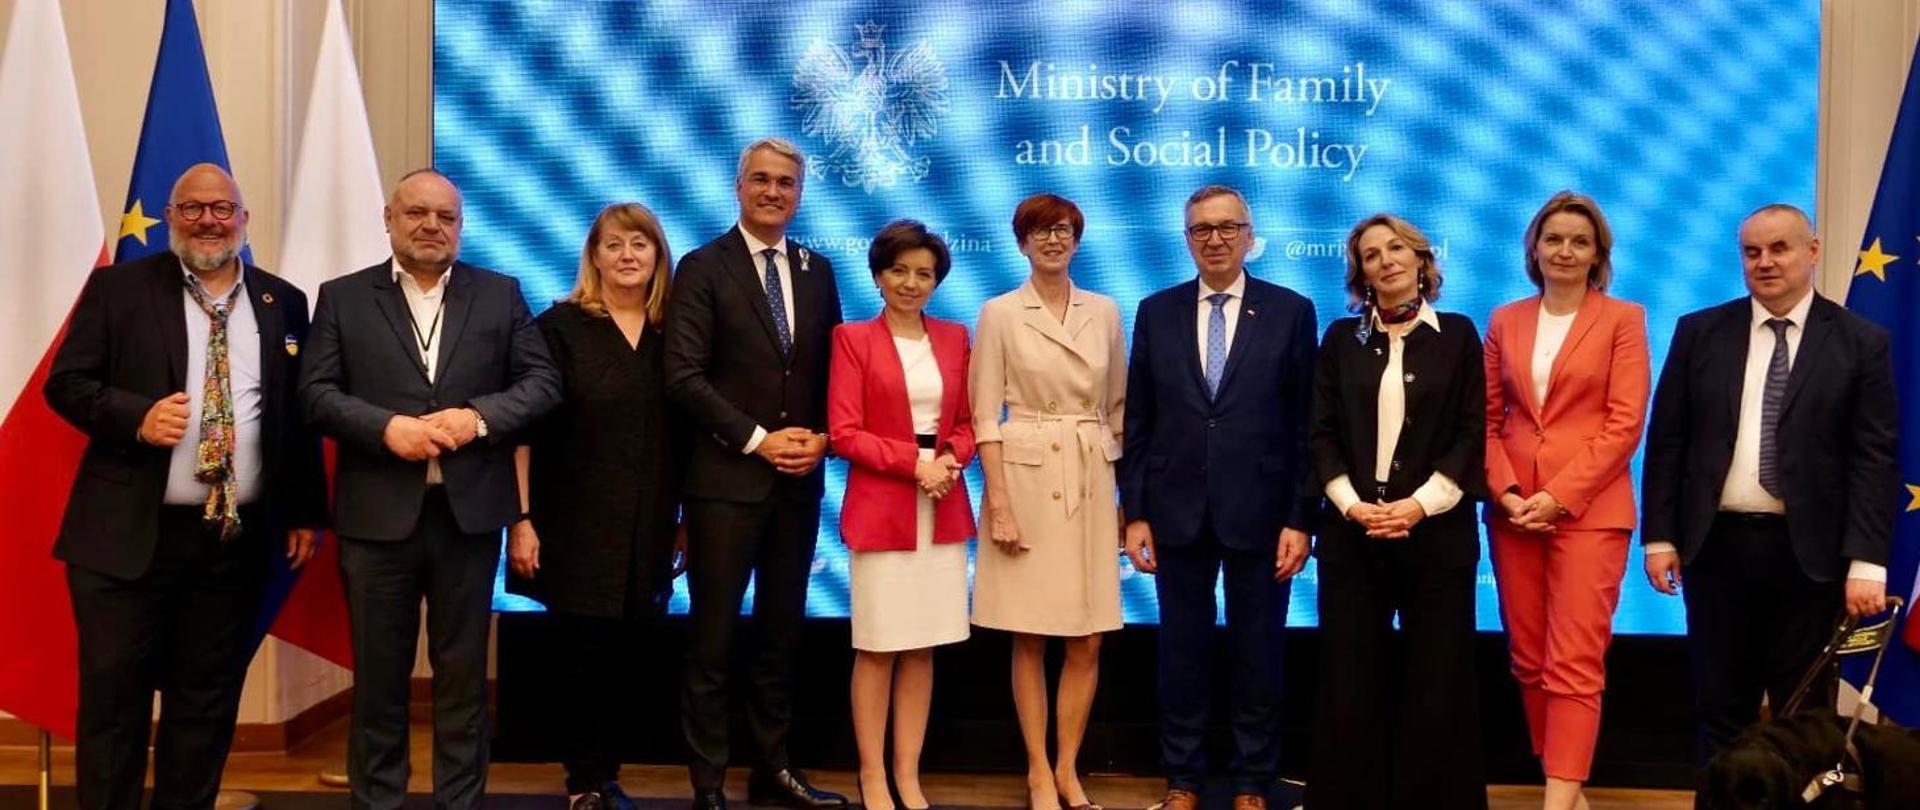 MEPs visiting the Ministry of Family